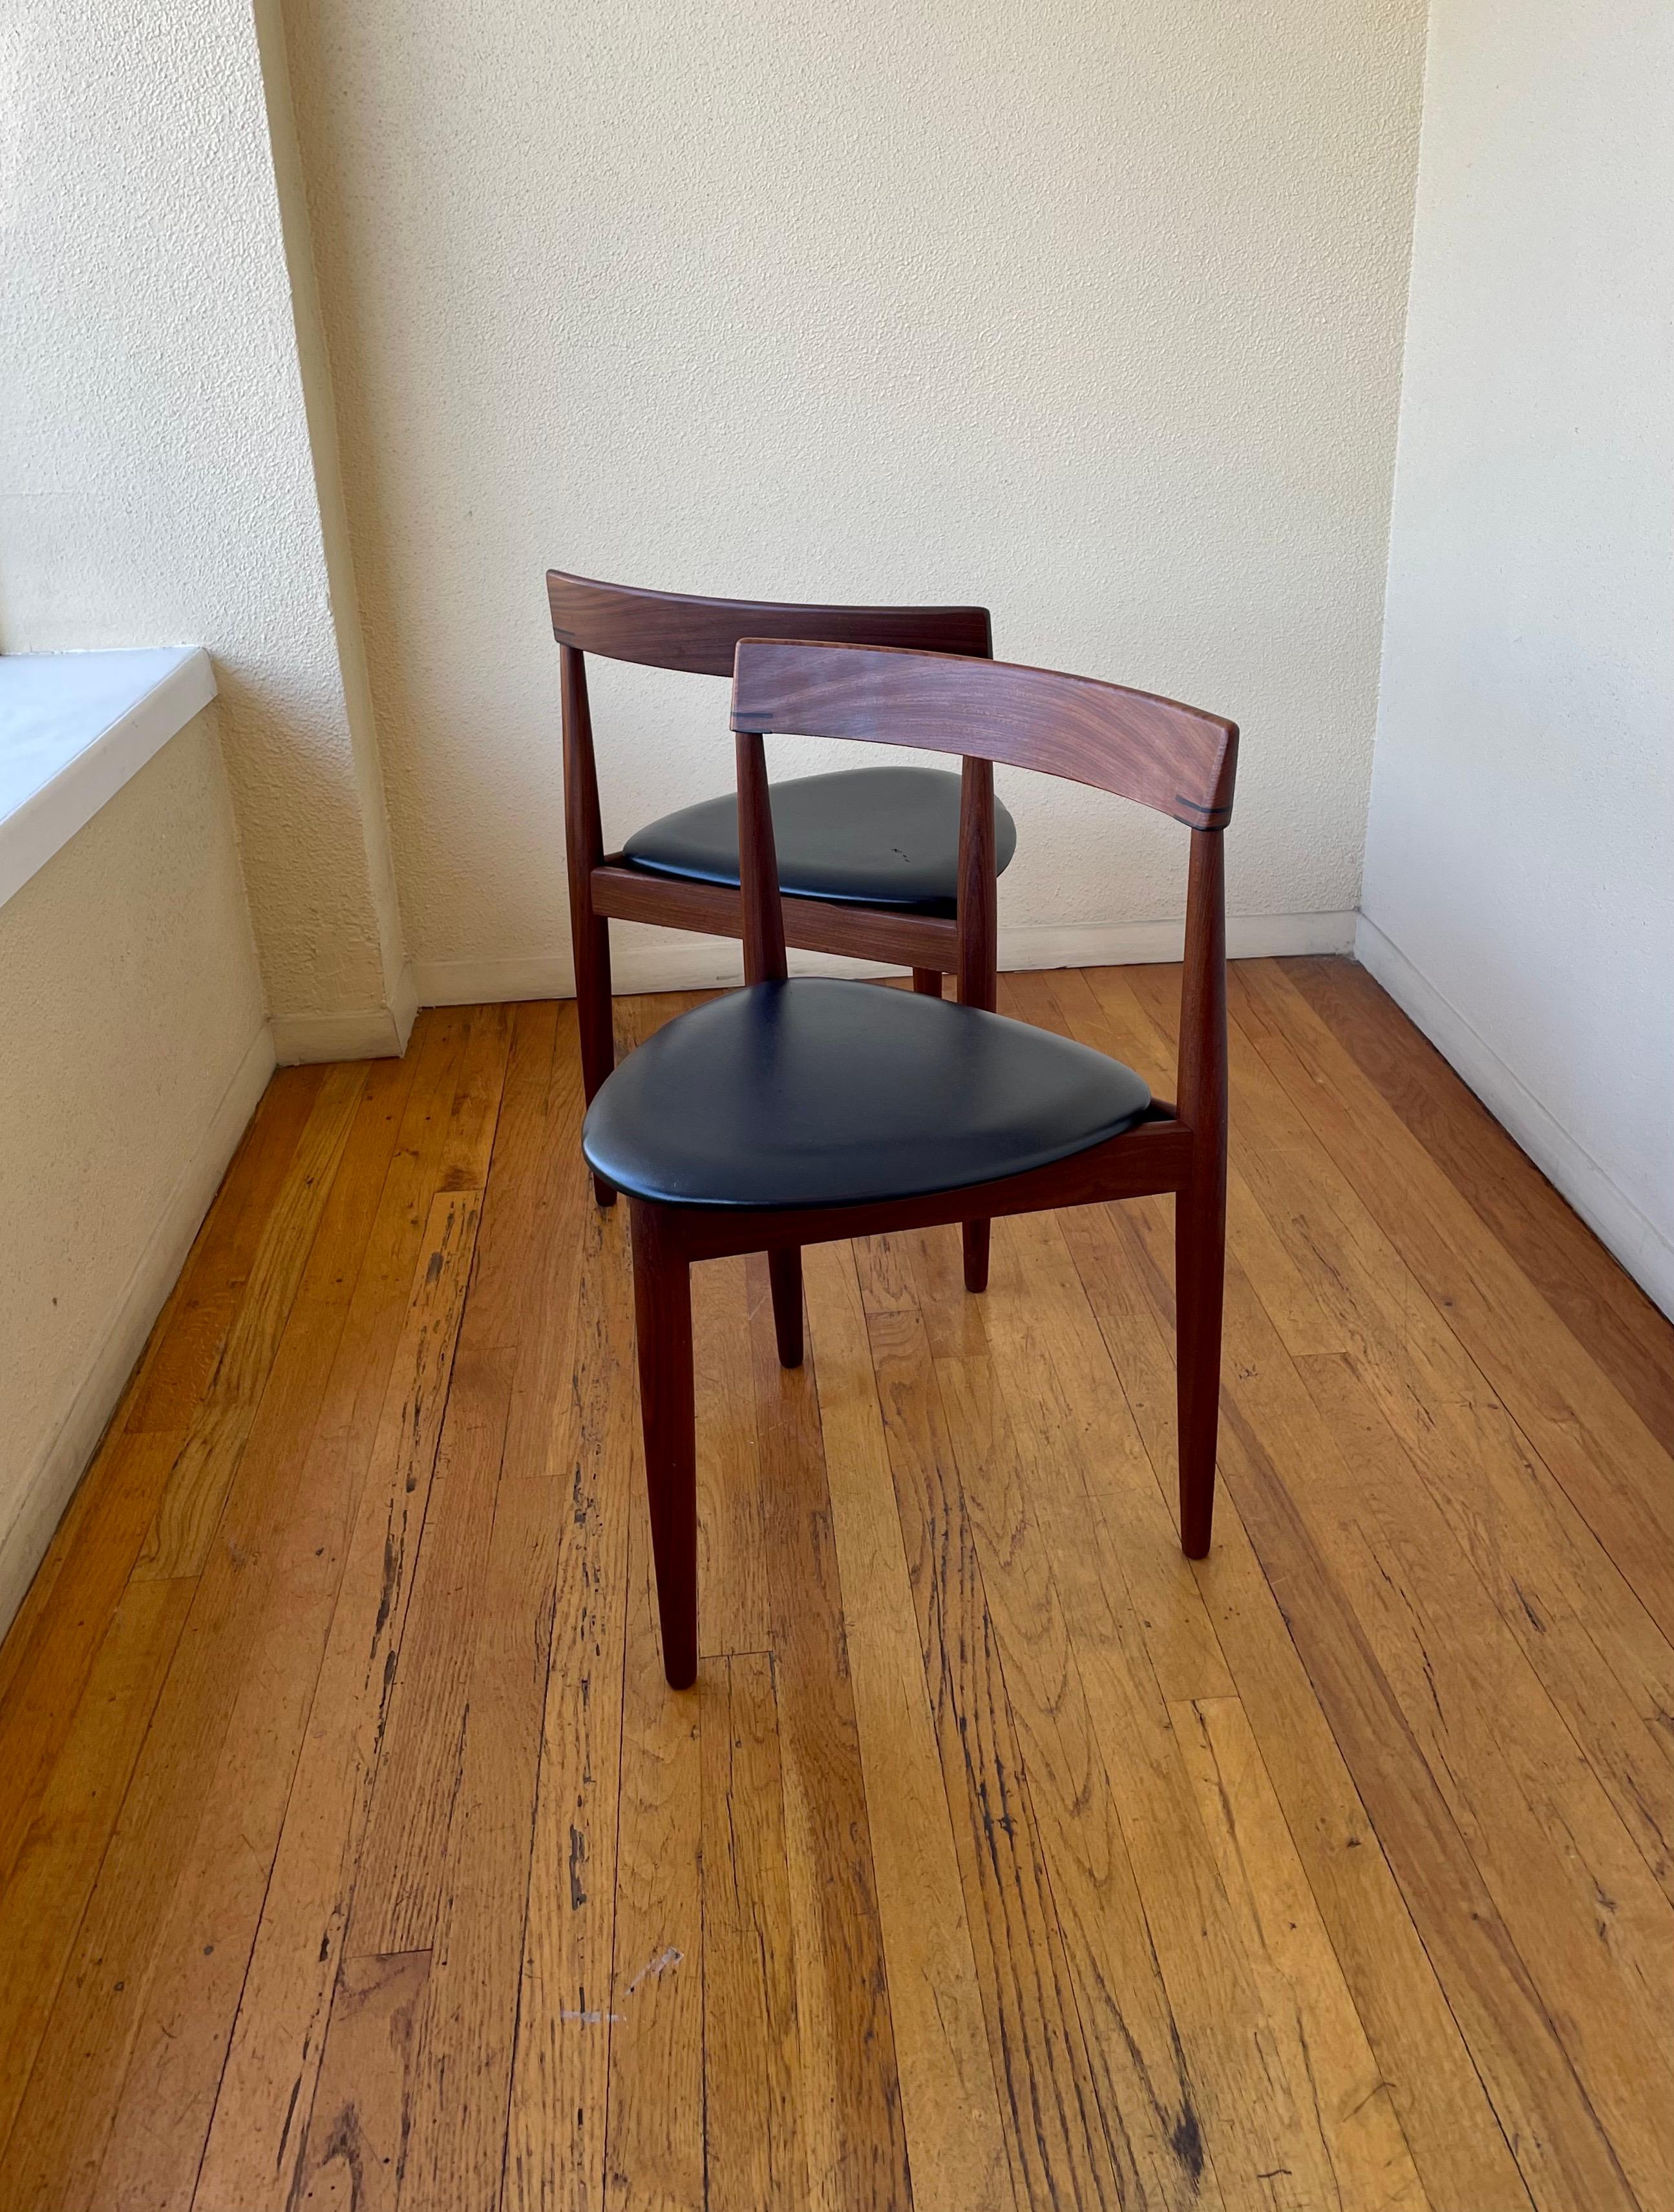 Pair of Danish modern, dining chairs by Hans Olsen for Frem Rojle feature contoured dark teak frames with 3 legs and Naugahyde, triangular seats.